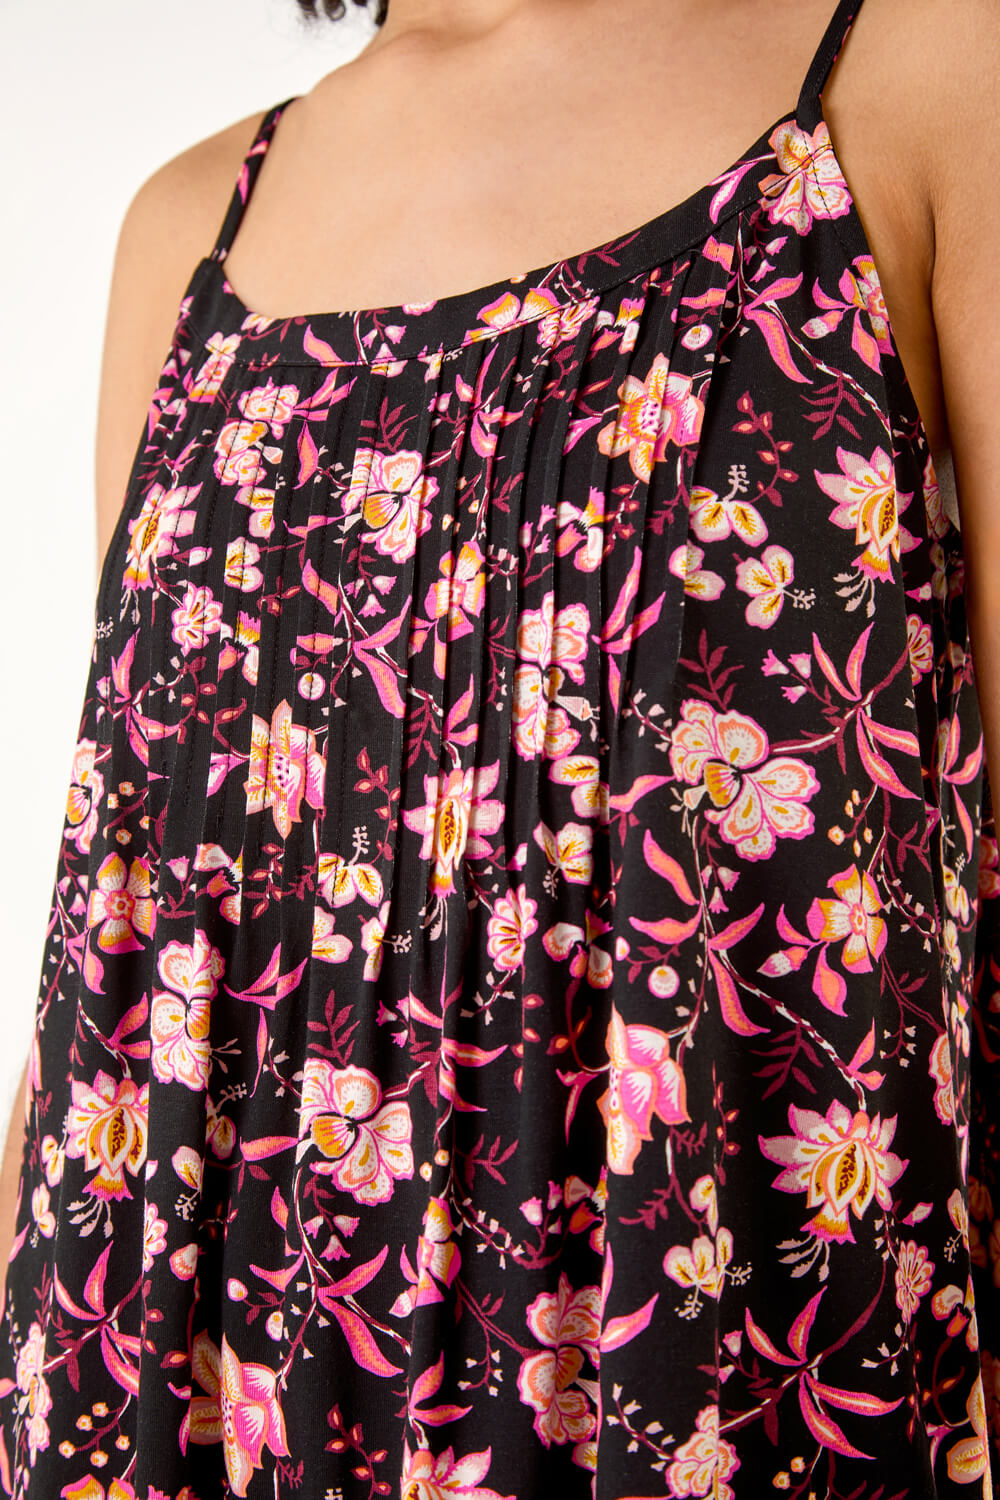 PINK Floral Print Pleat Front Cami Top, Image 5 of 5